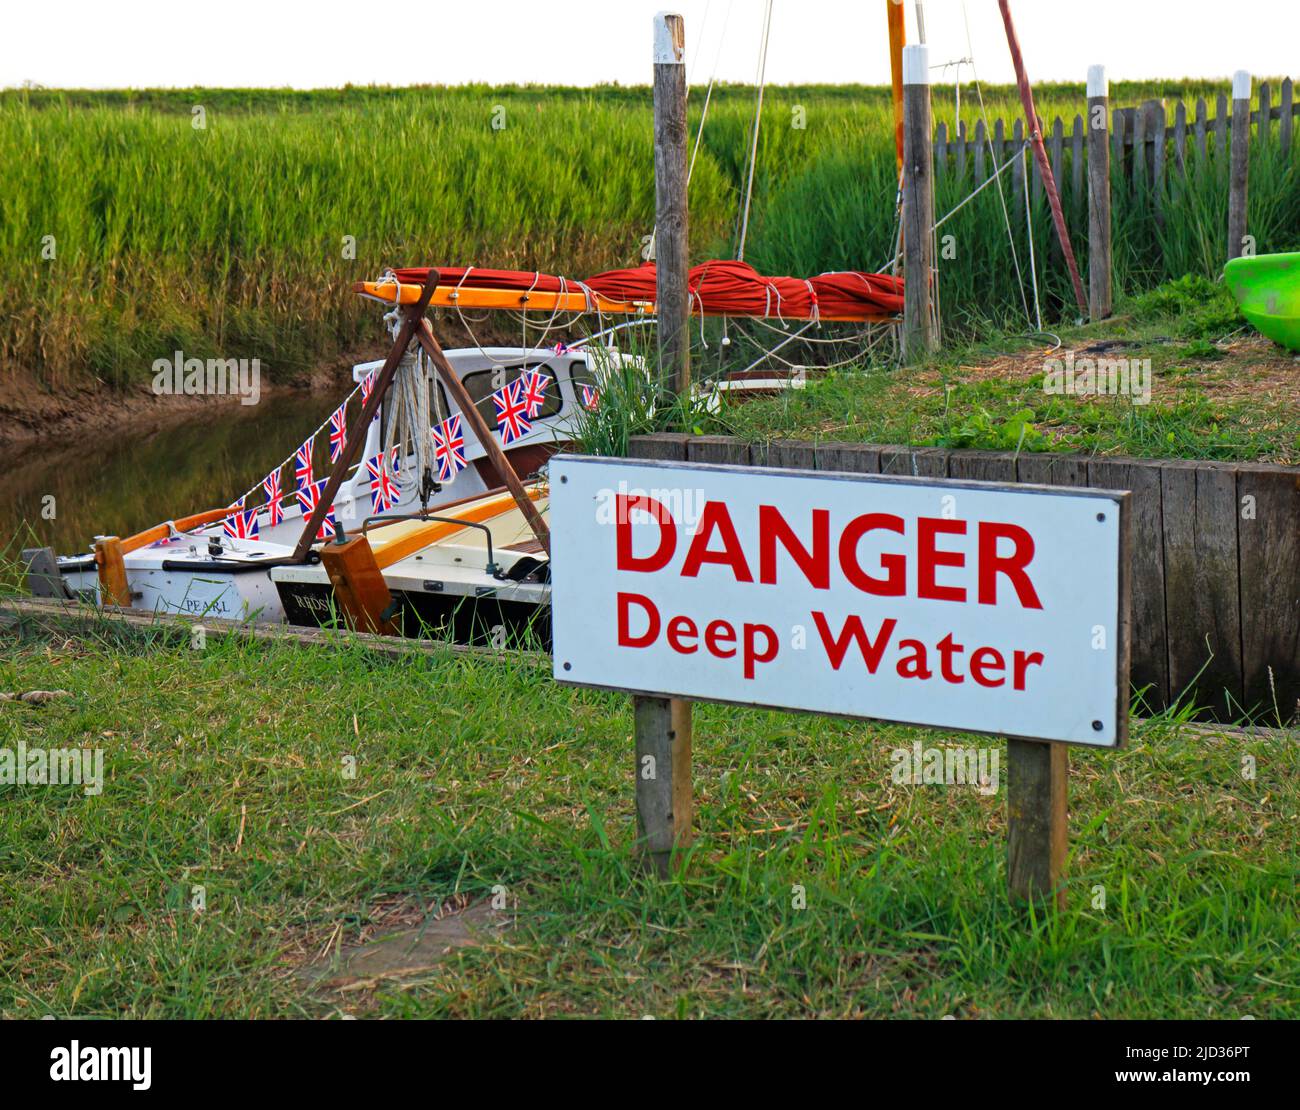 A Danger sign relating to deep water in the small restored harbour on the North Norfolk coast at Cley-next-the-Sea, Norfolk, England, United Kingdom. Stock Photo